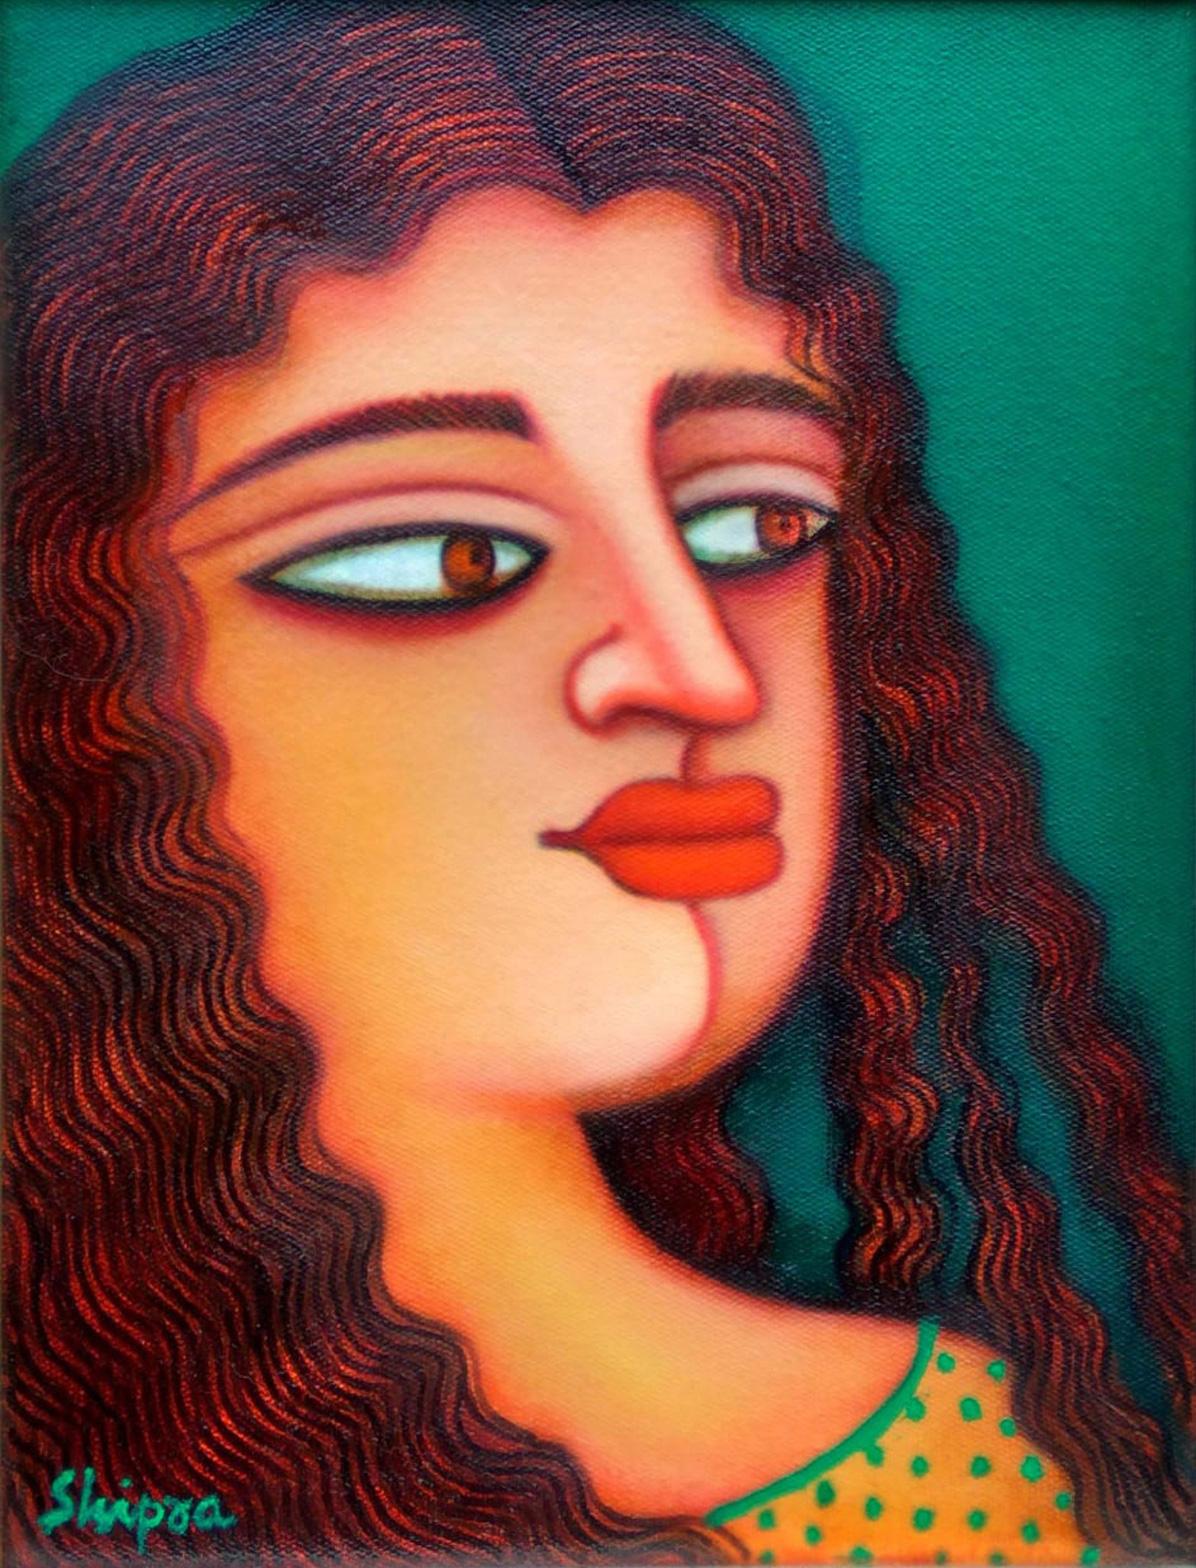 Indian Women, Acrylic on canvas, Red, Green, Brown by Indian Artist "In Stock"